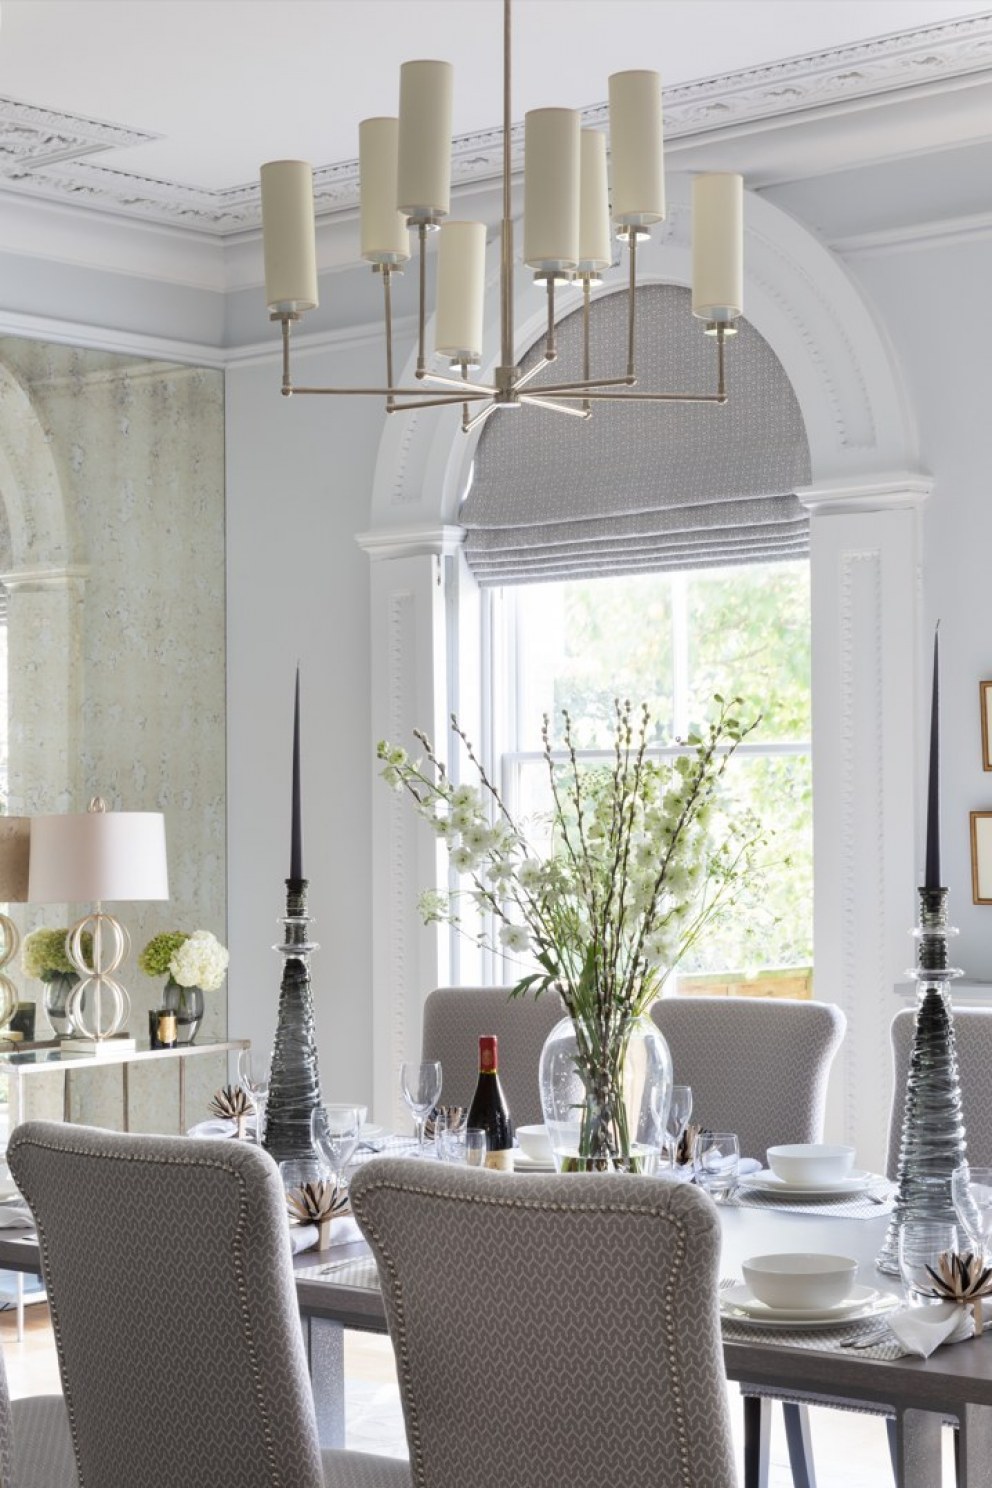 Lincolnshire Townhouse  | Dining room details | Interior Designers